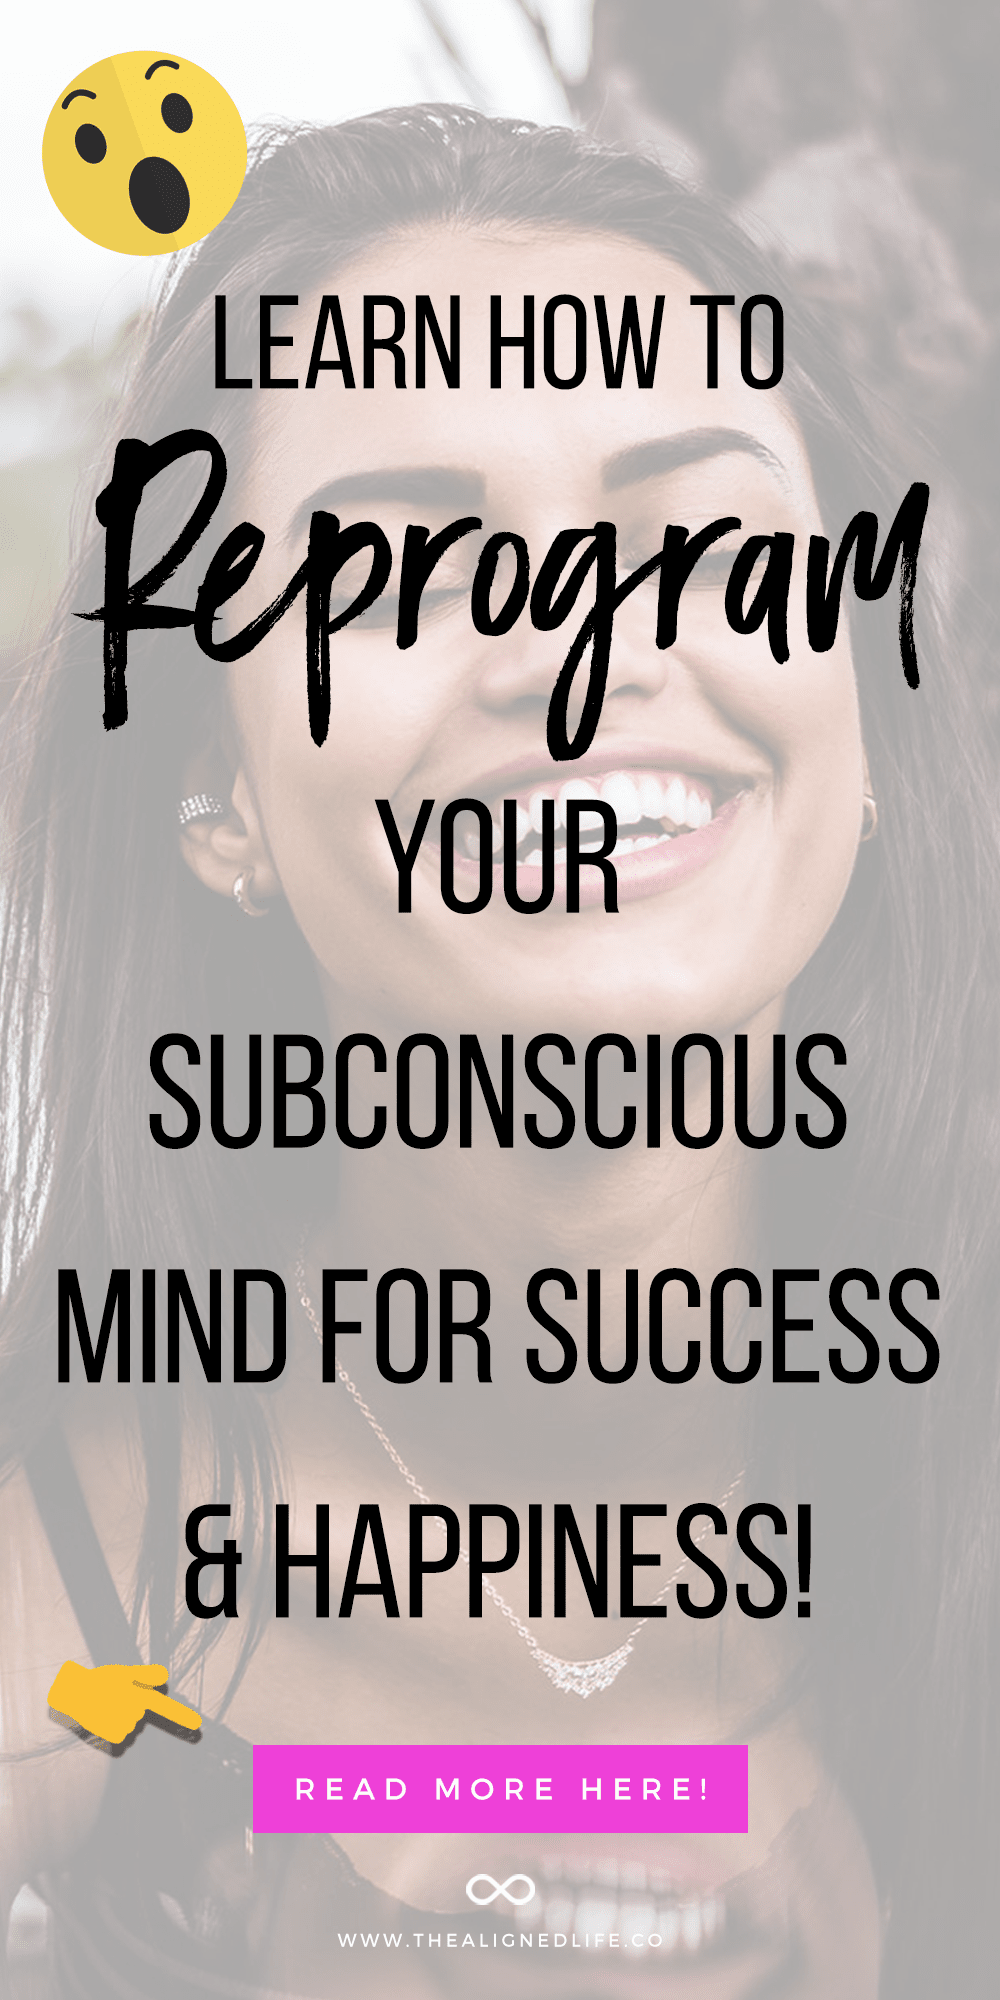 Reprogram Your Subconscious Mind For Success And Happiness!